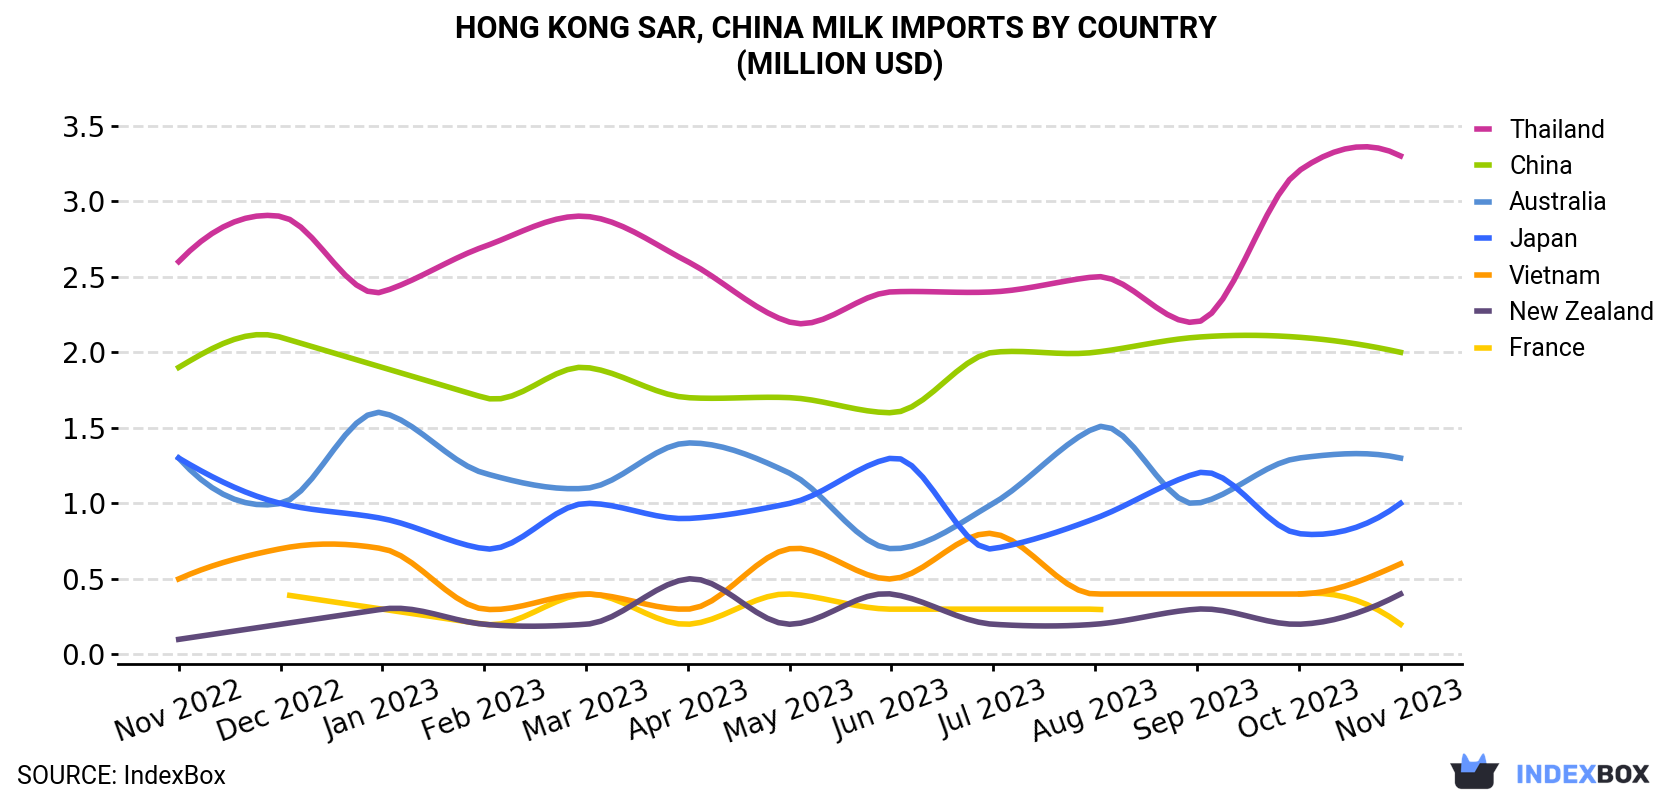 Hong Kong Milk Imports By Country (Million USD)